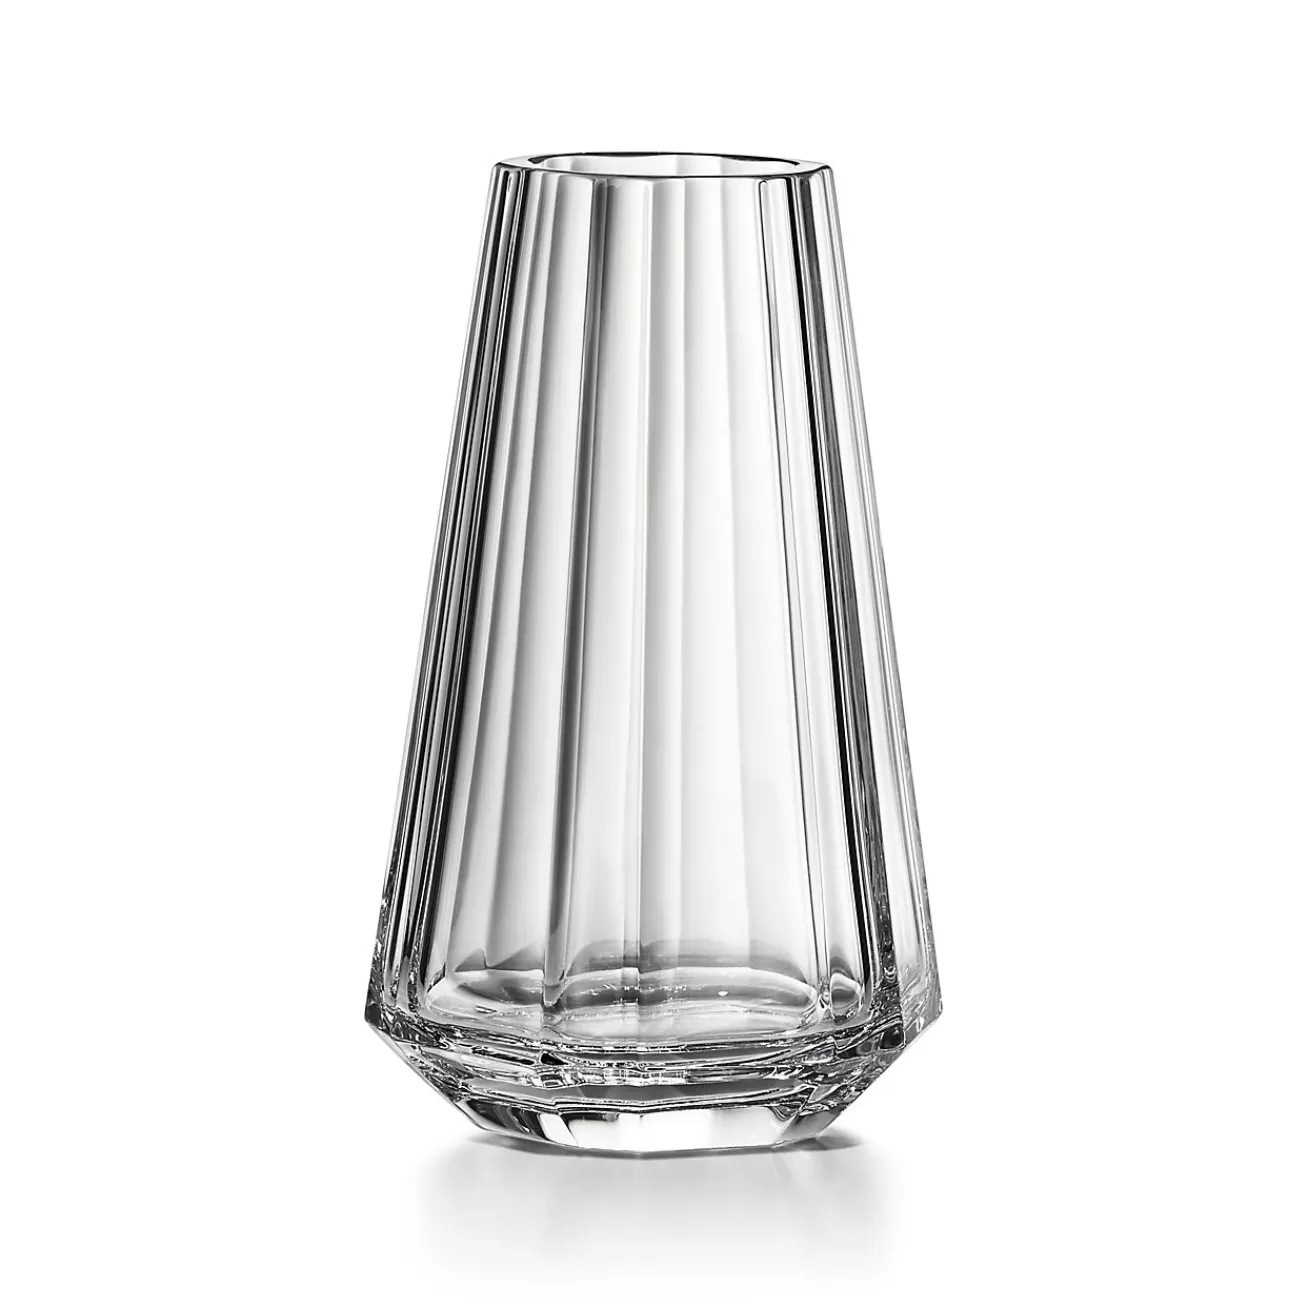 Tiffany & Co. Tiffany Facets Large Tapered Vase in Lead Crystal Glass | ^ The Home | Housewarming Gifts